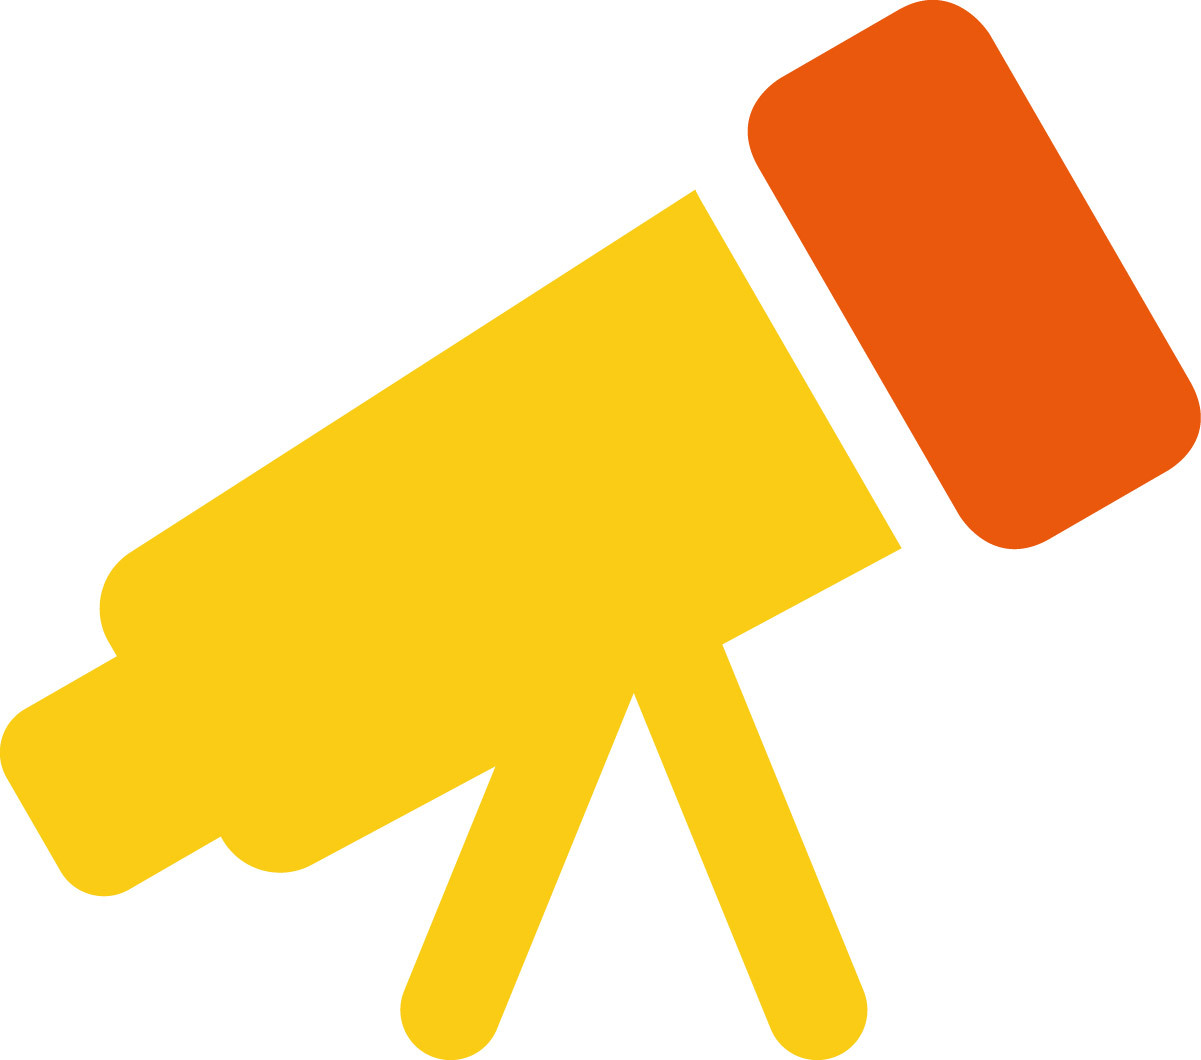 An icon of a yellow telescope, part of it is orange